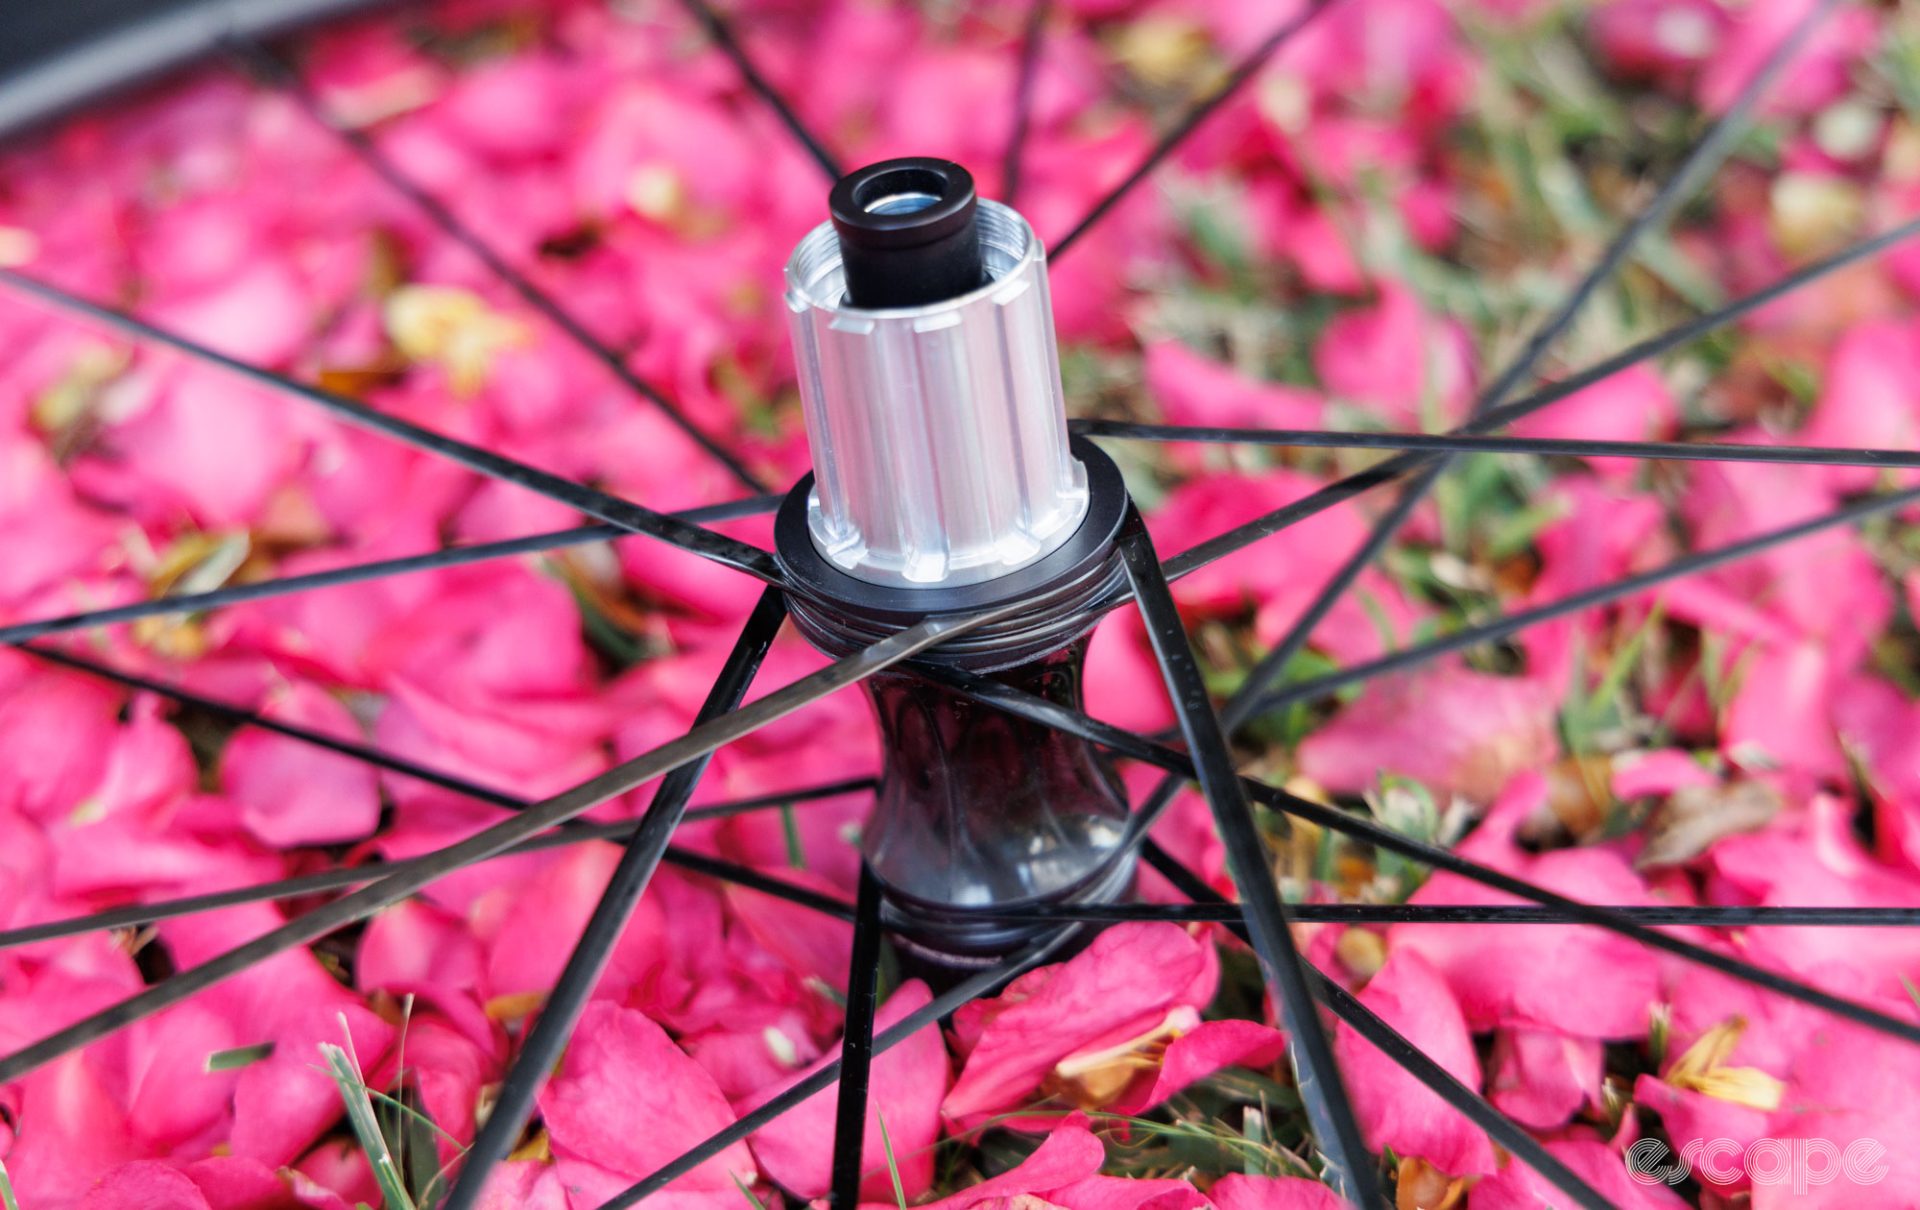 The rear hub of a Partington MKII rear wheel, showing the spoke design. The wheel is placed on a bed of pink flowers. 